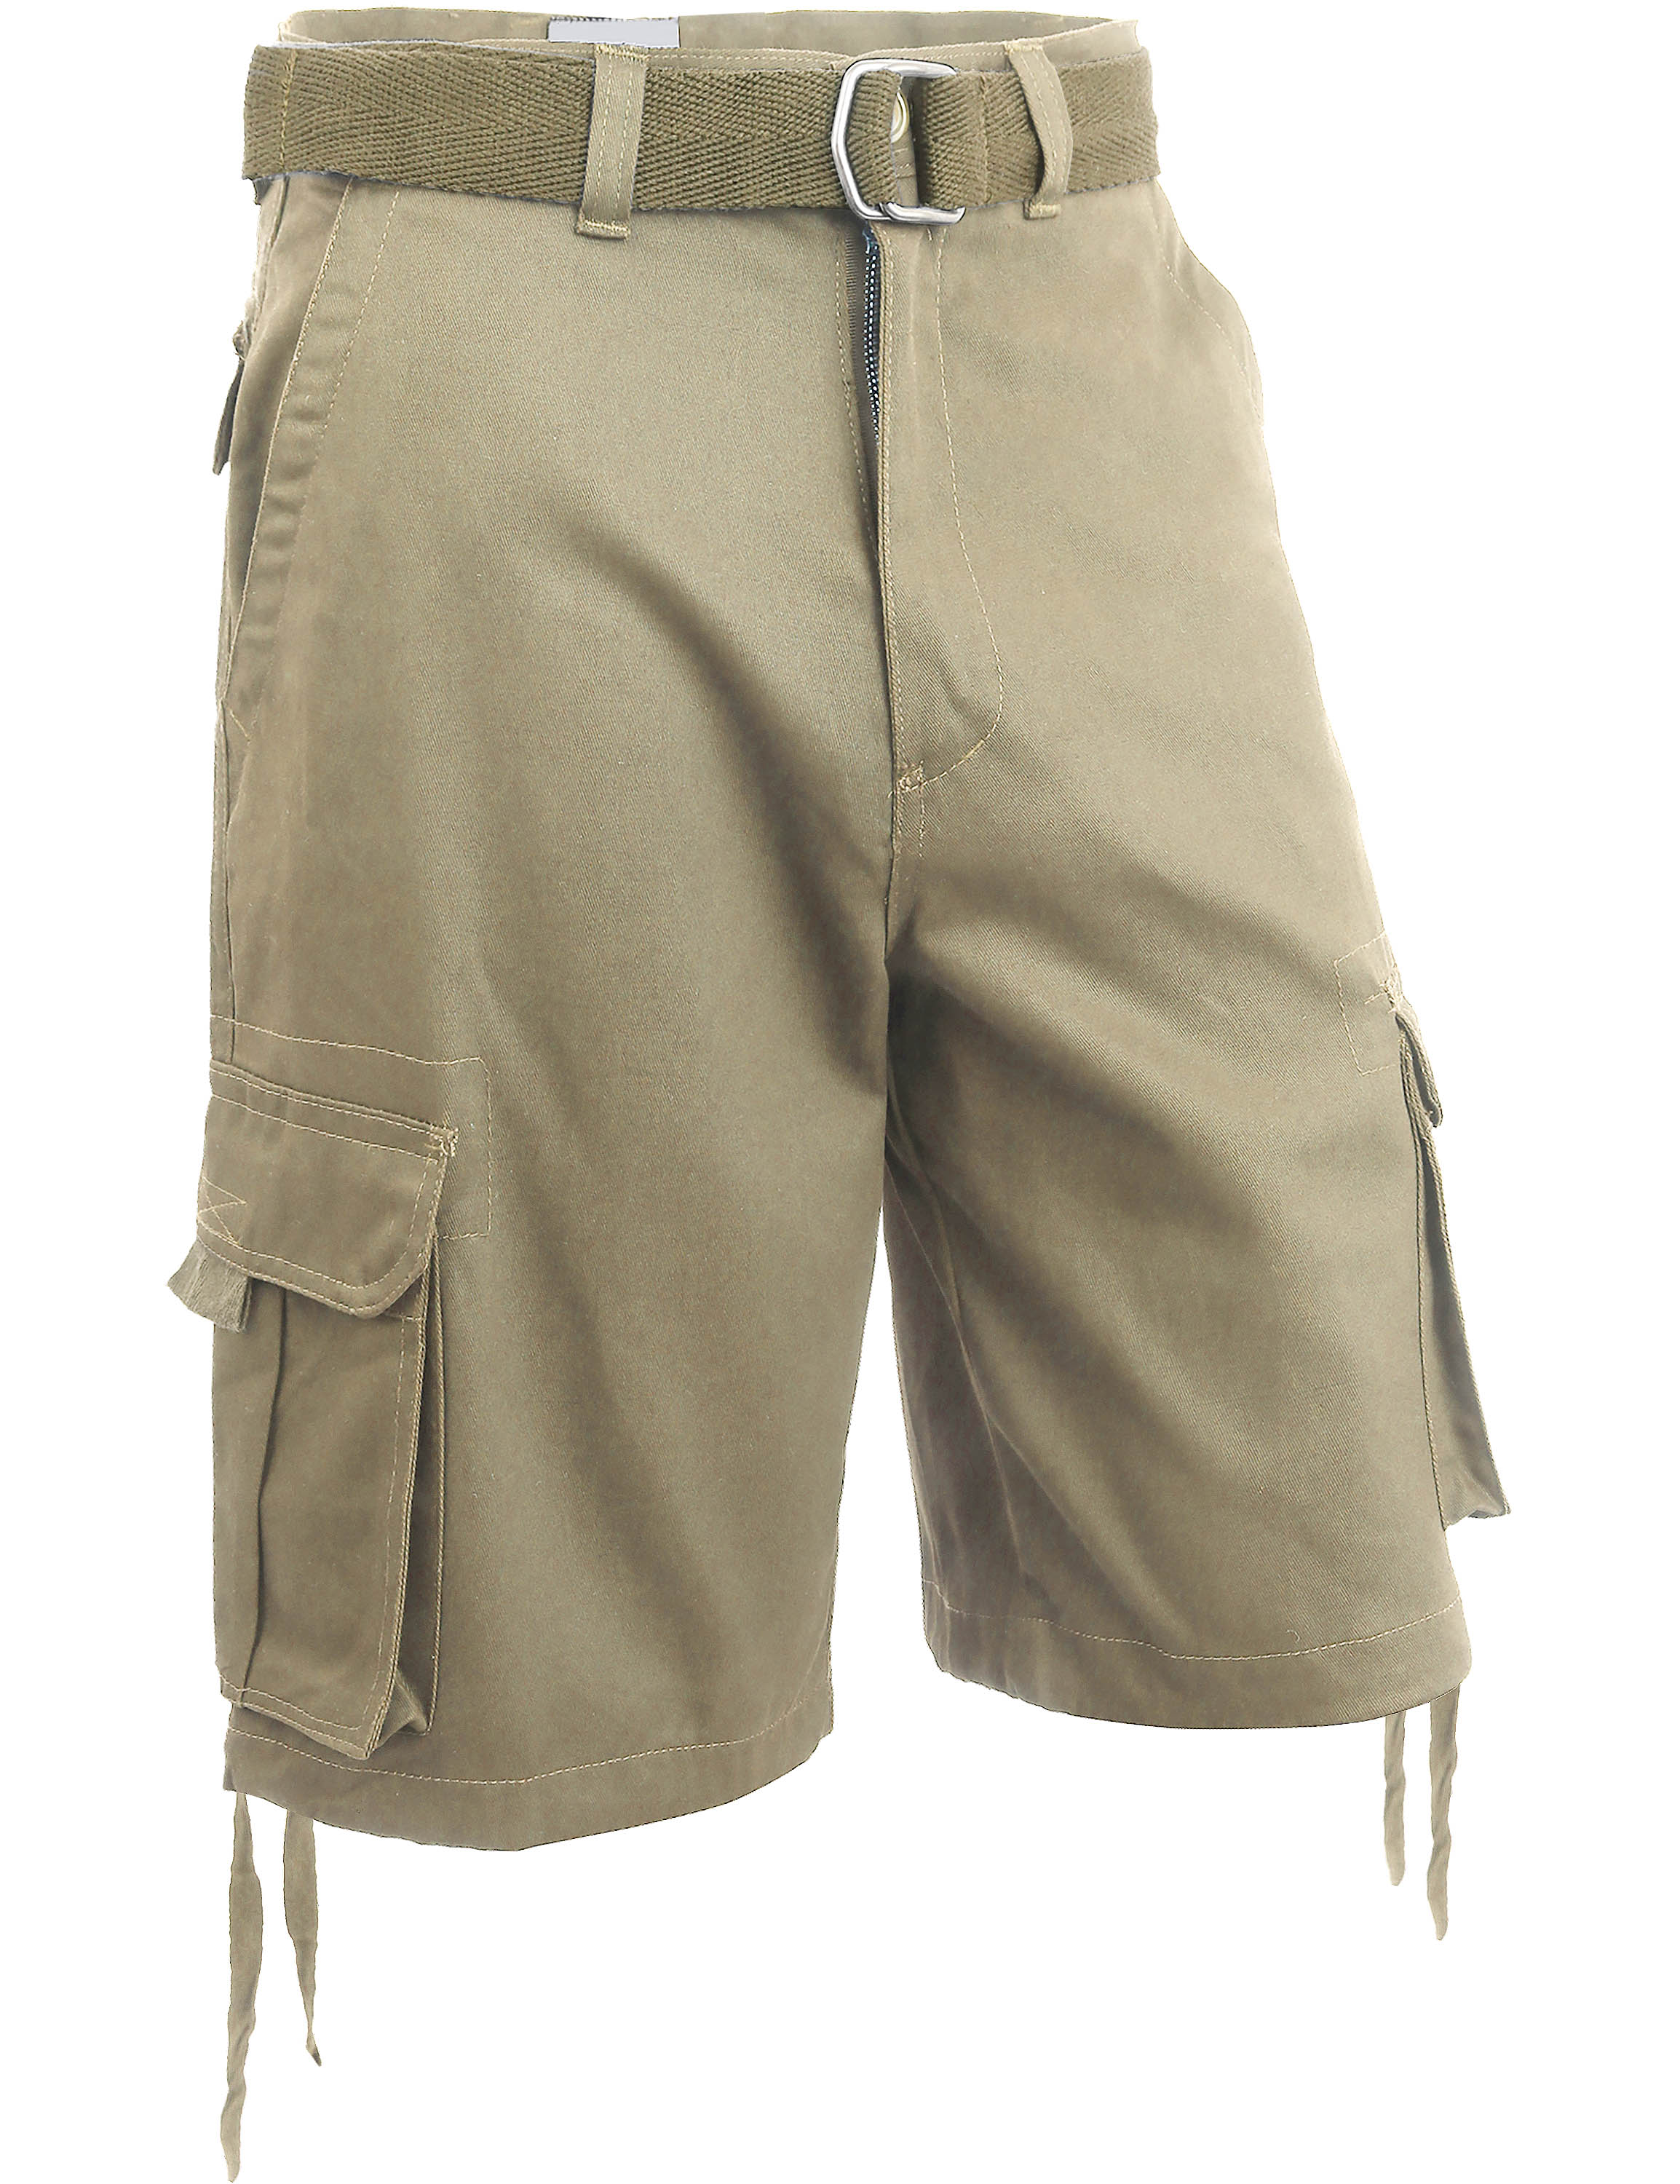 Hat and Beyond Mens Premium Twill Cargo Shorts with Belt Utility Pockets Size 30-52